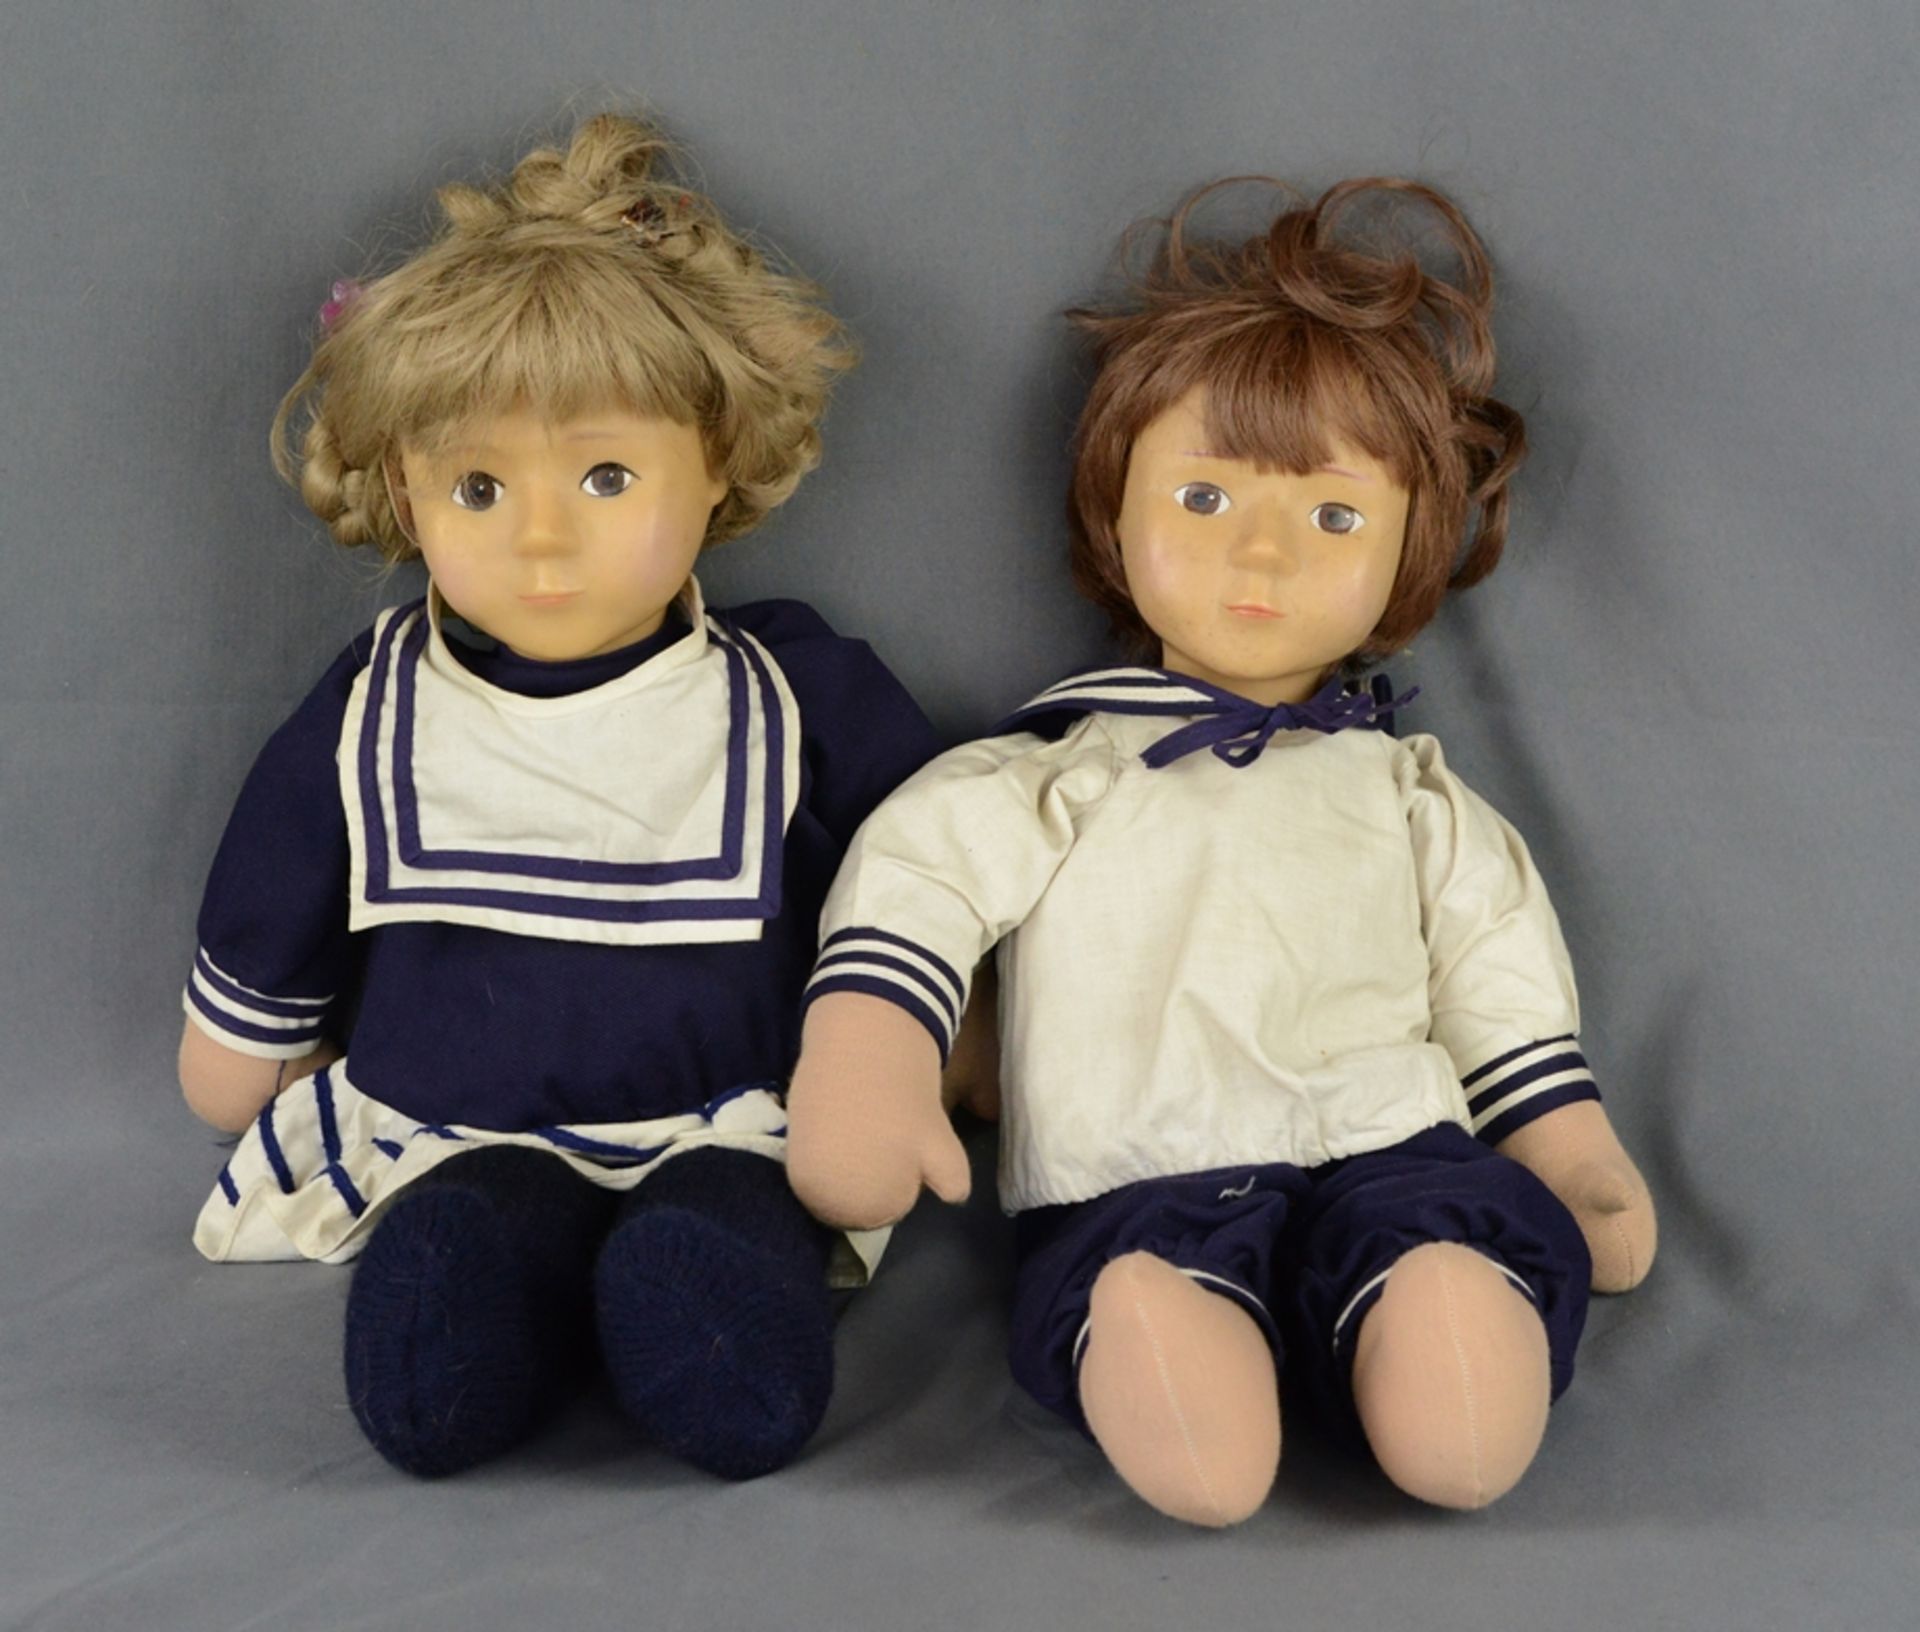 Two dolls, Creation Marie Luic, boy and girl dressed as sailors, head made of plastic, body made of